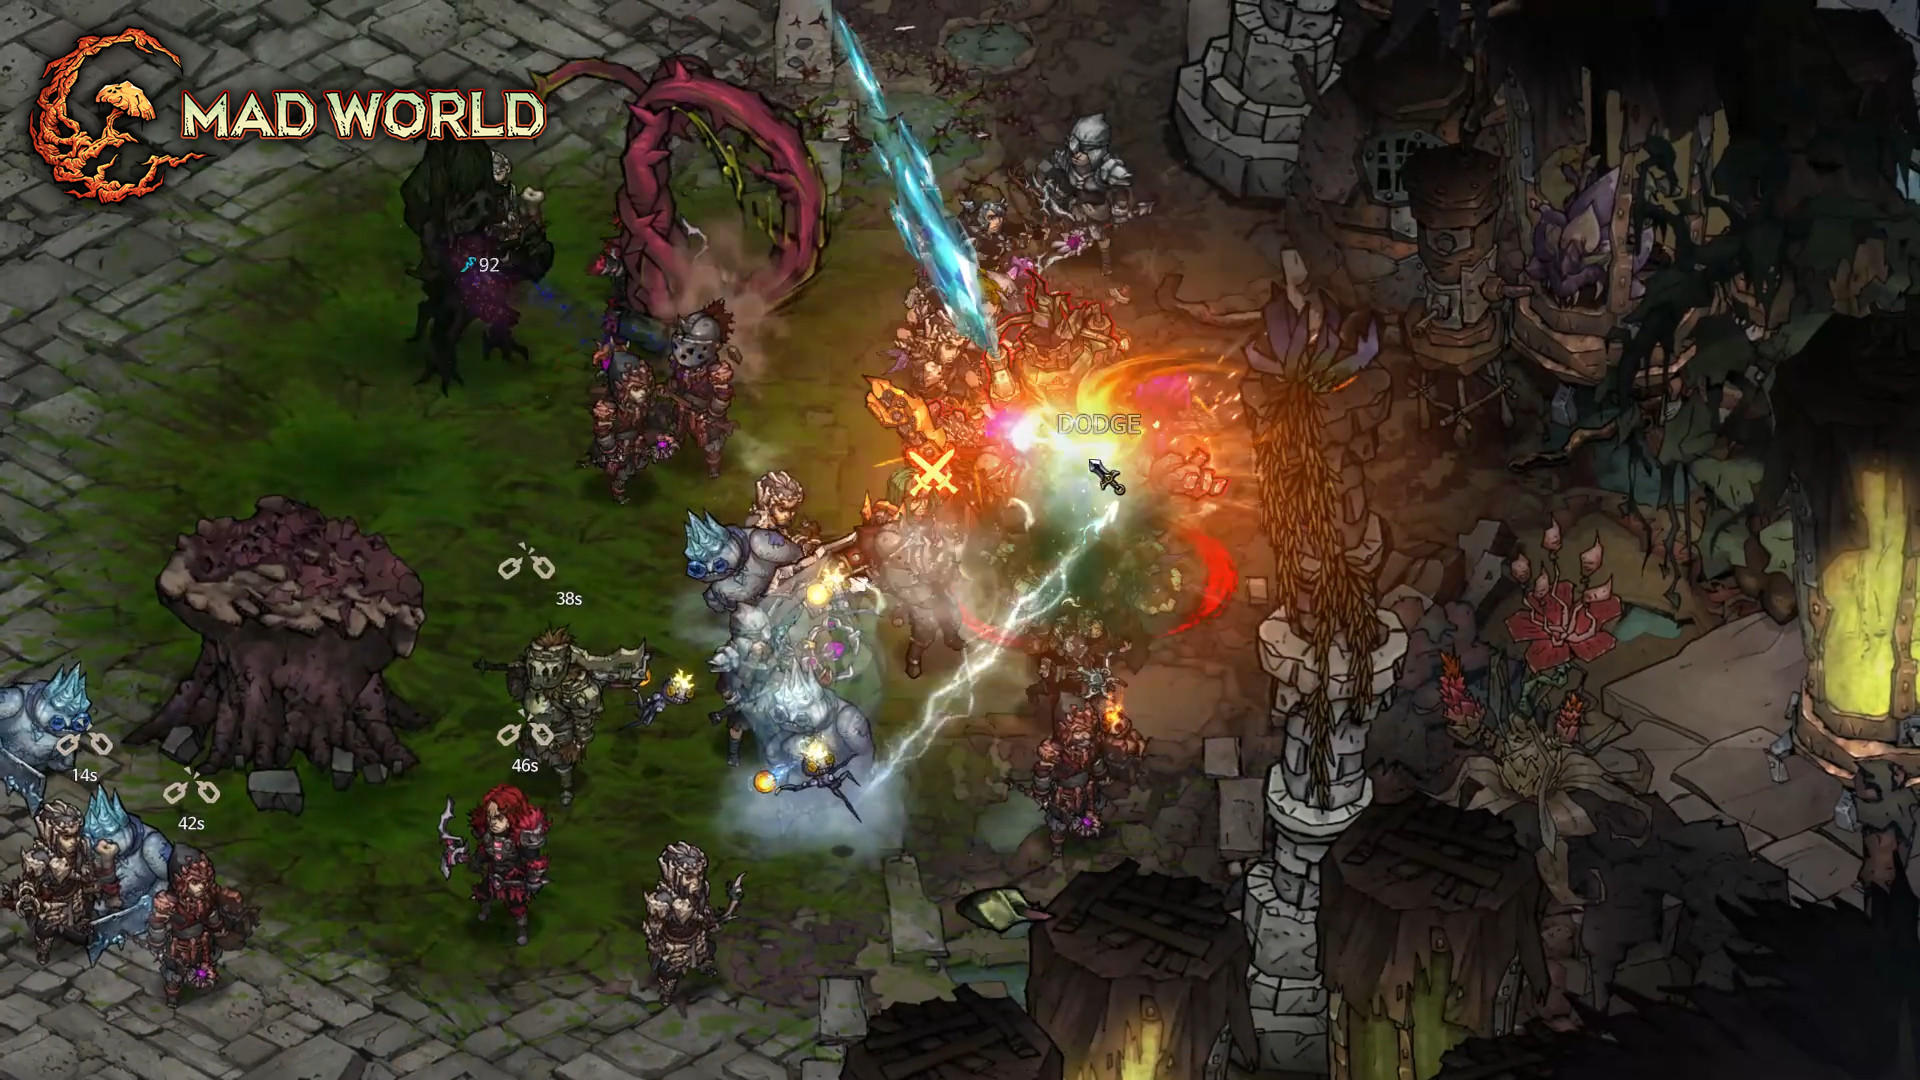 2D MMORPG Mad World Is Having an Alpha Test - MAD WORLD - TapTap